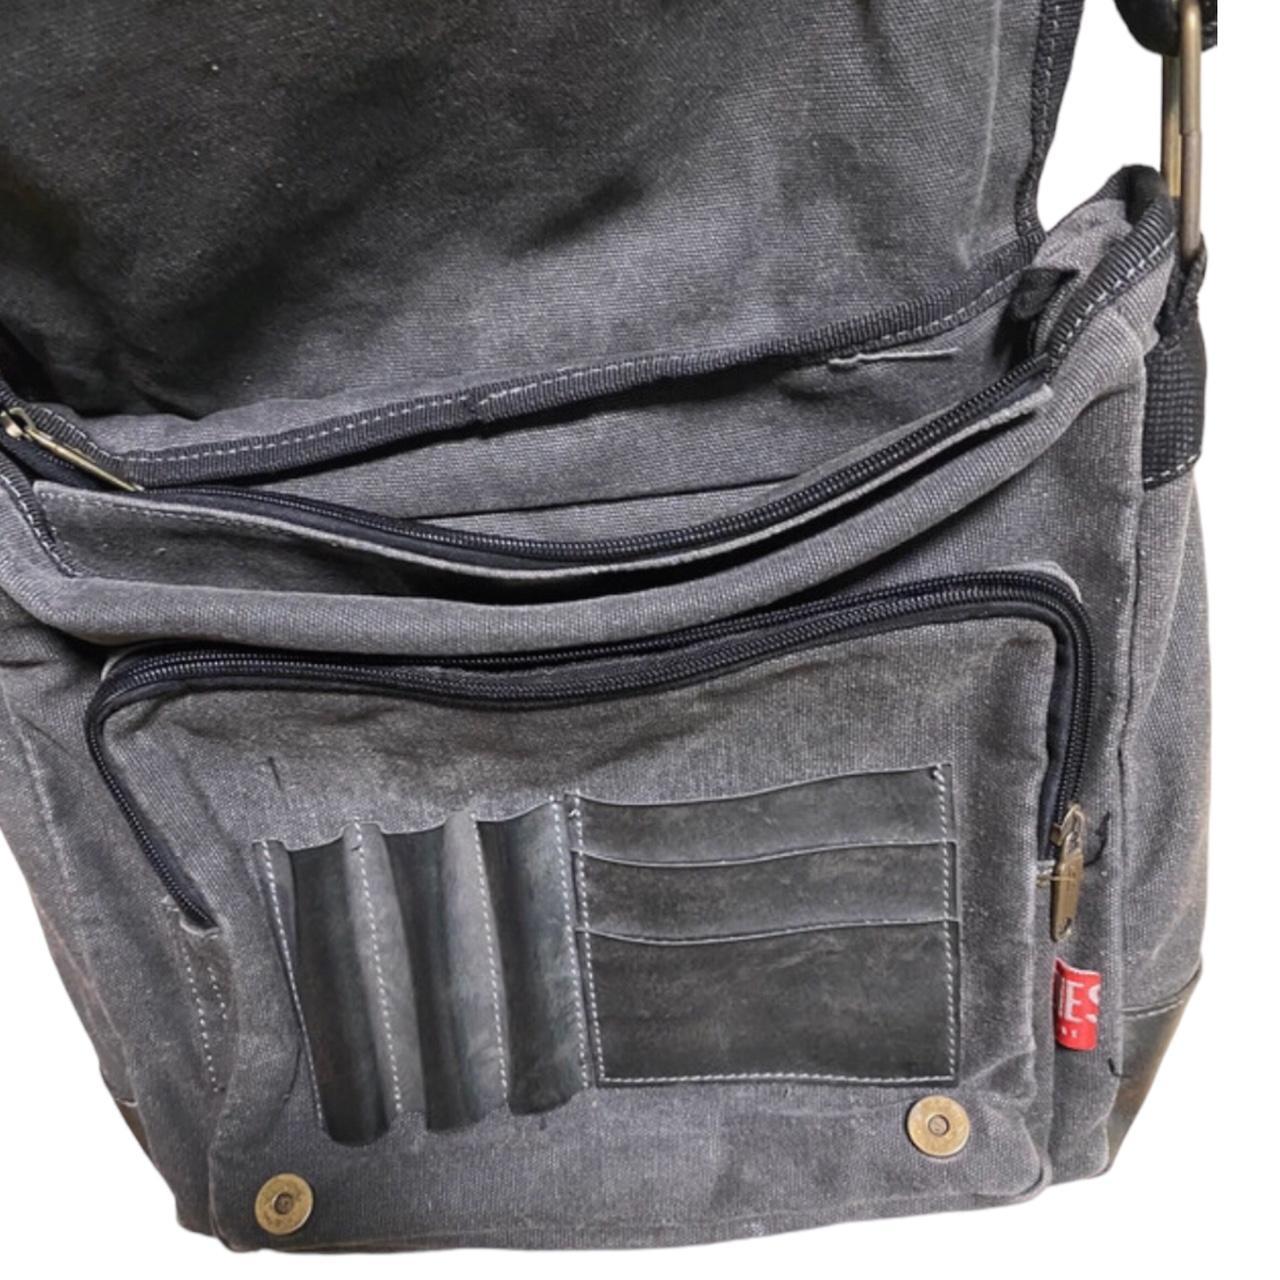 The Diesel Cargo Messenger Bag , - Another insane